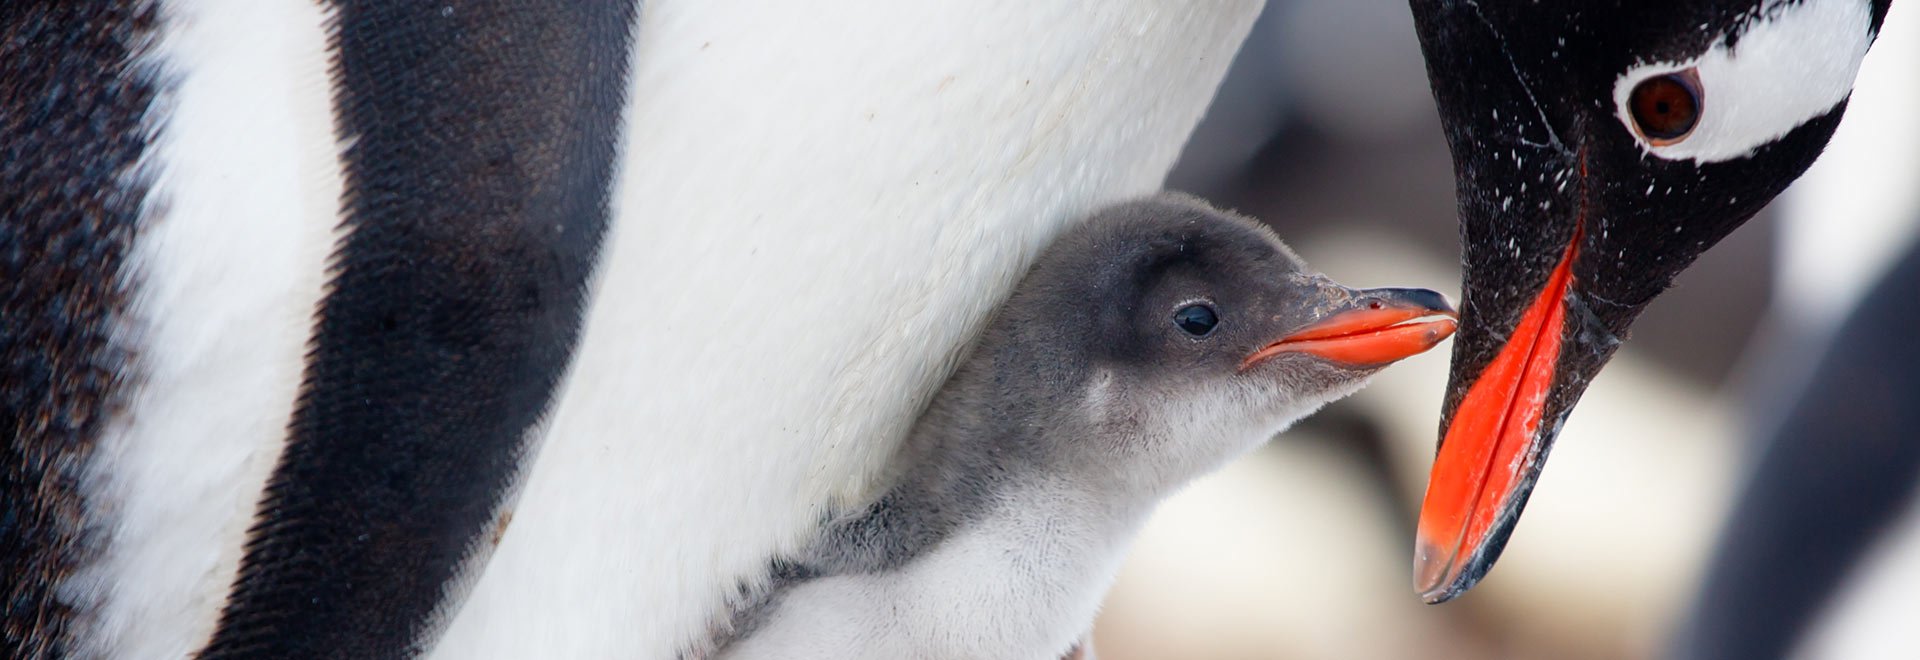 Baby Penguin with his mother spotted while on Luxury Antarctica Cruise